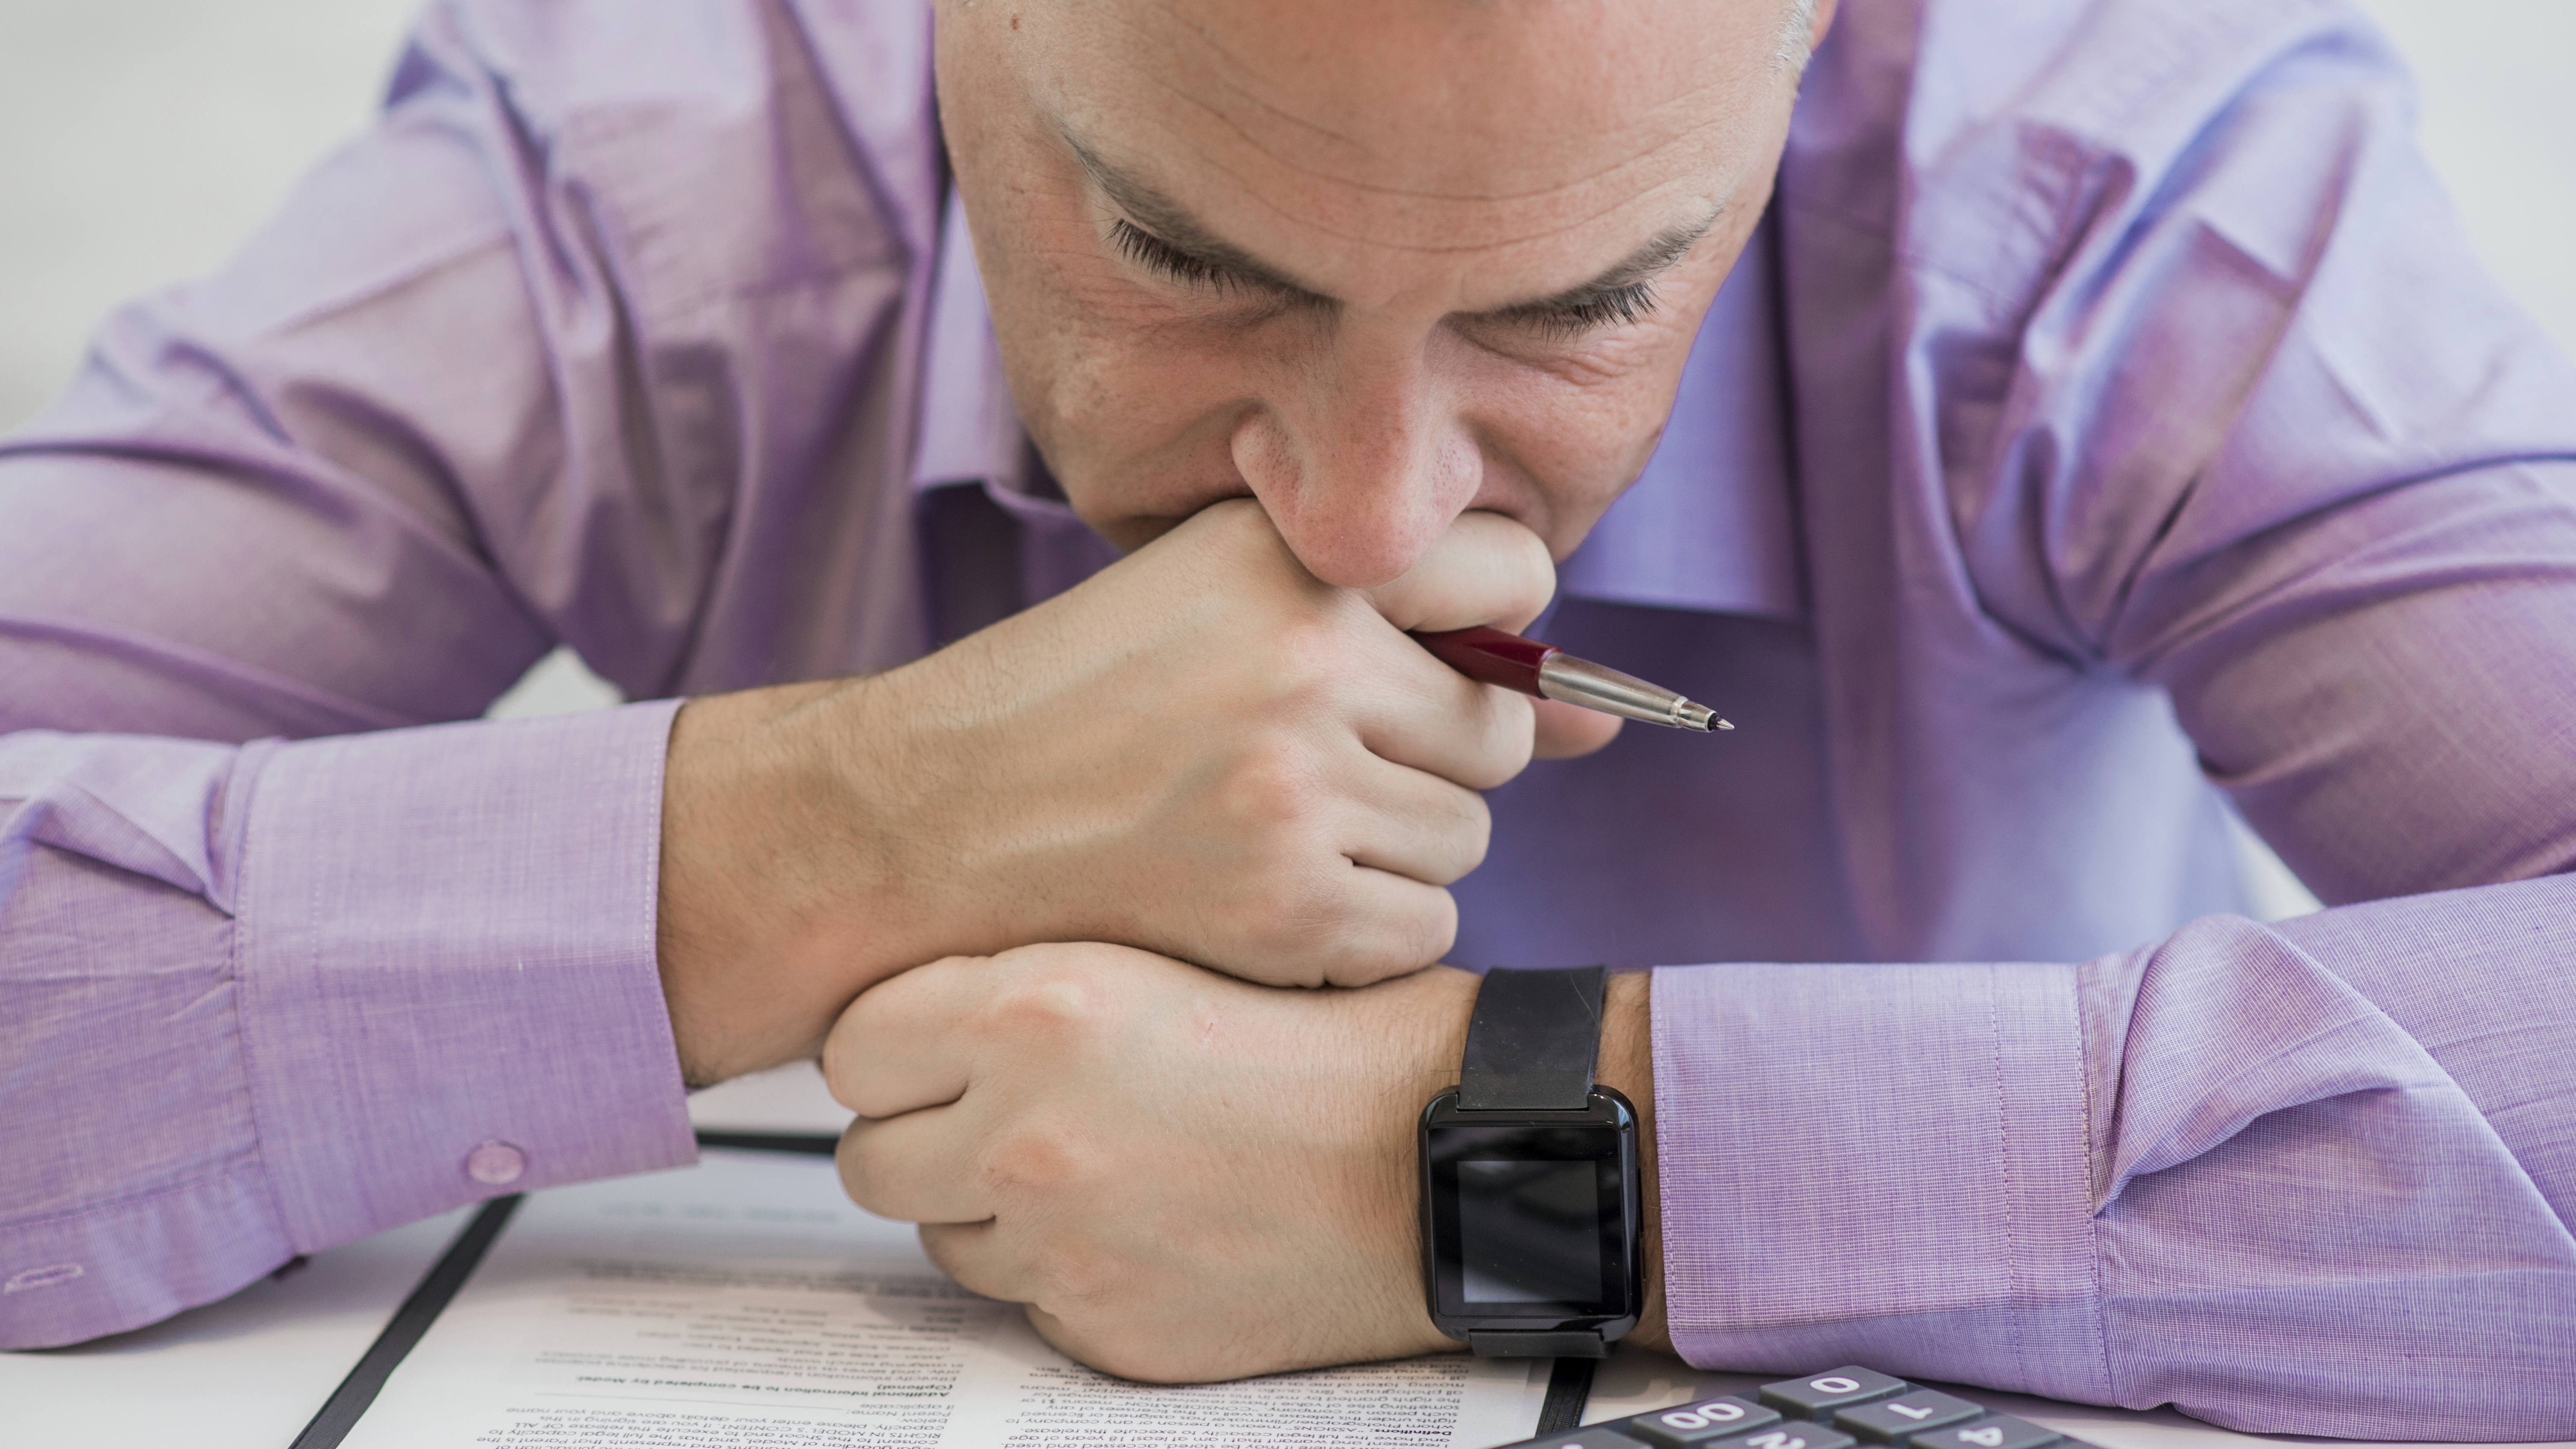 a man resting his head on his hands, holding a pen at work and looking sad, depressed or stressed in the office